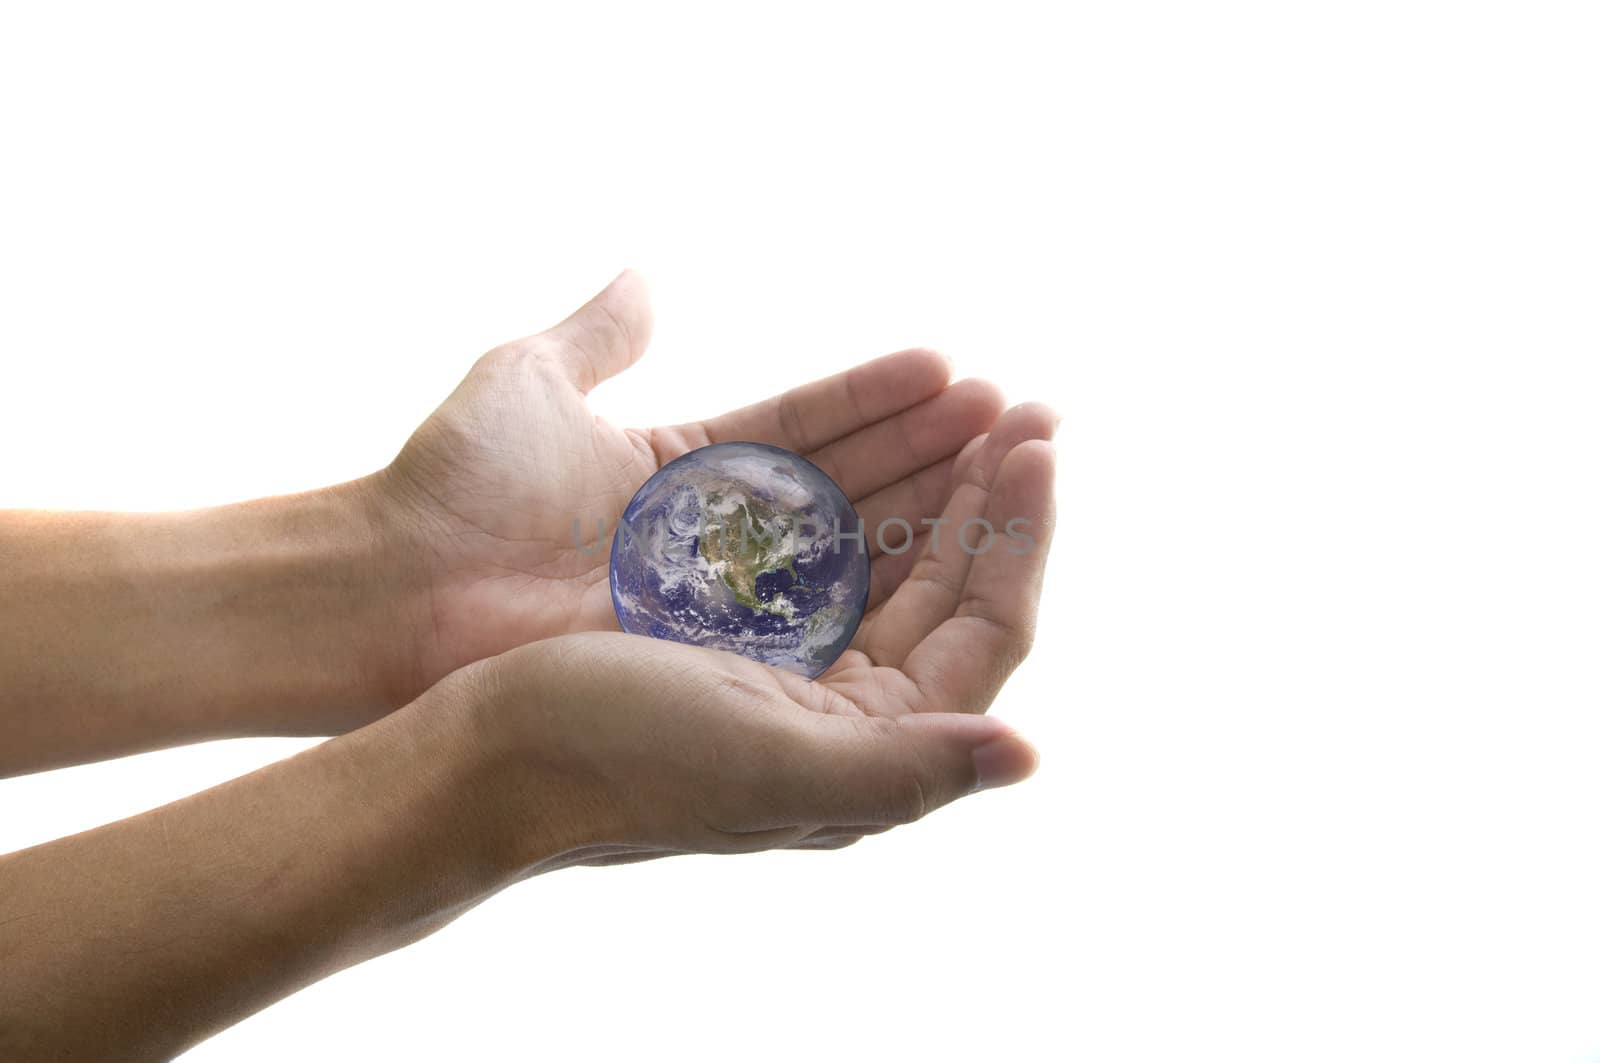 photo of hand holding globe with isolated white background

Earth map by courtesy of visibleearth.nasa.gov 